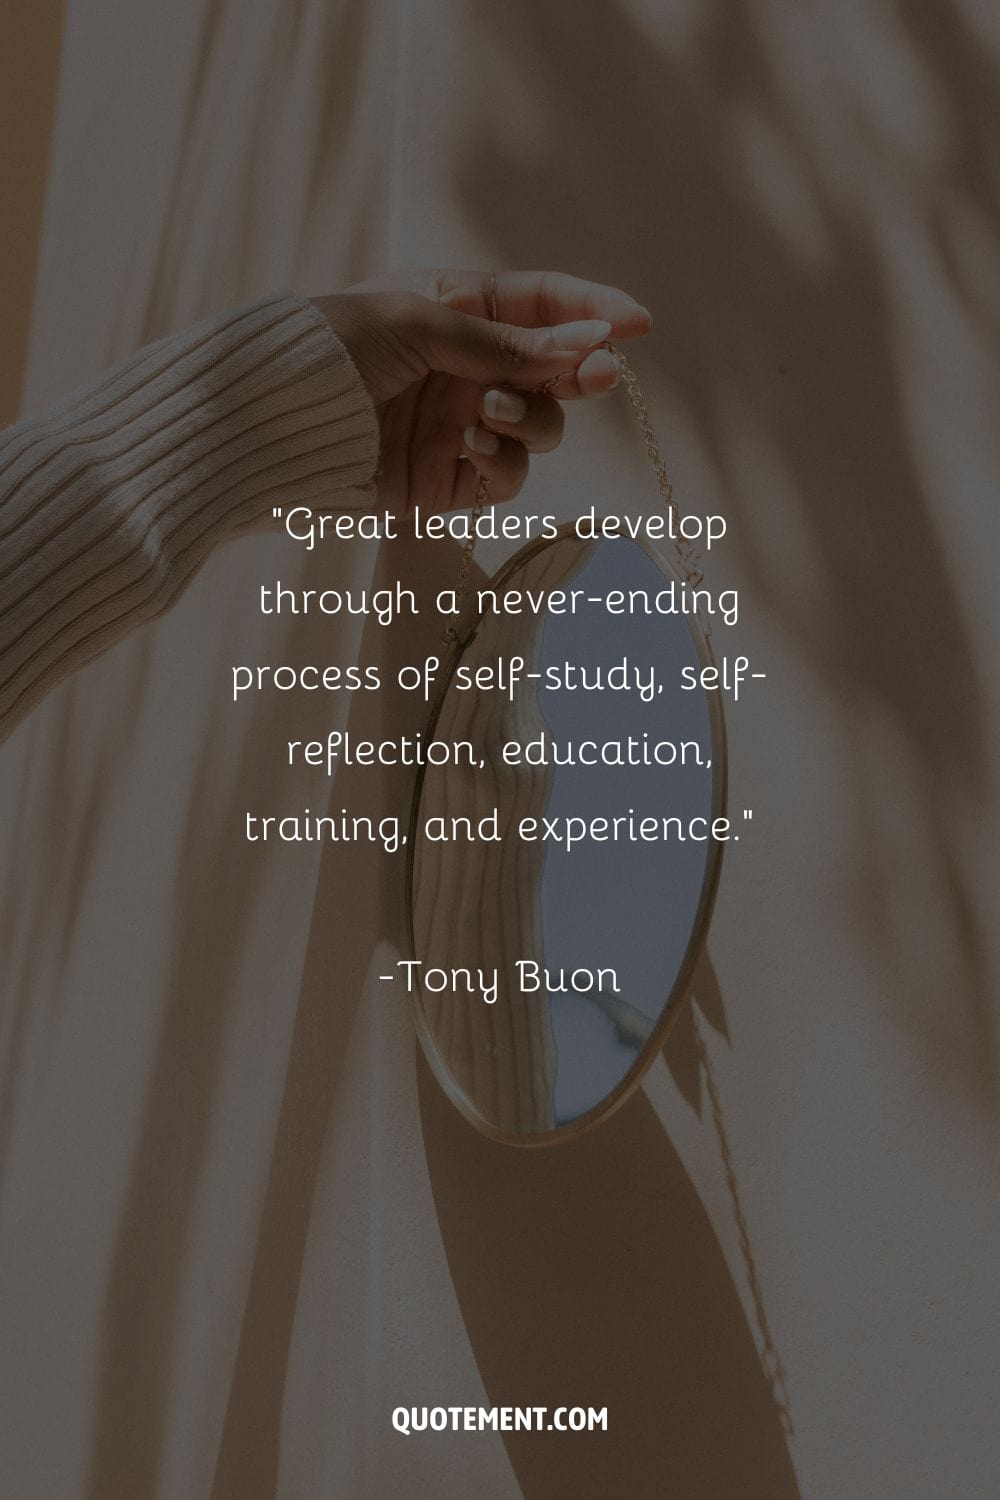 Great leaders develop through a never-ending process of self-study, self-reflection, education, training, and experience. – Tony Buon